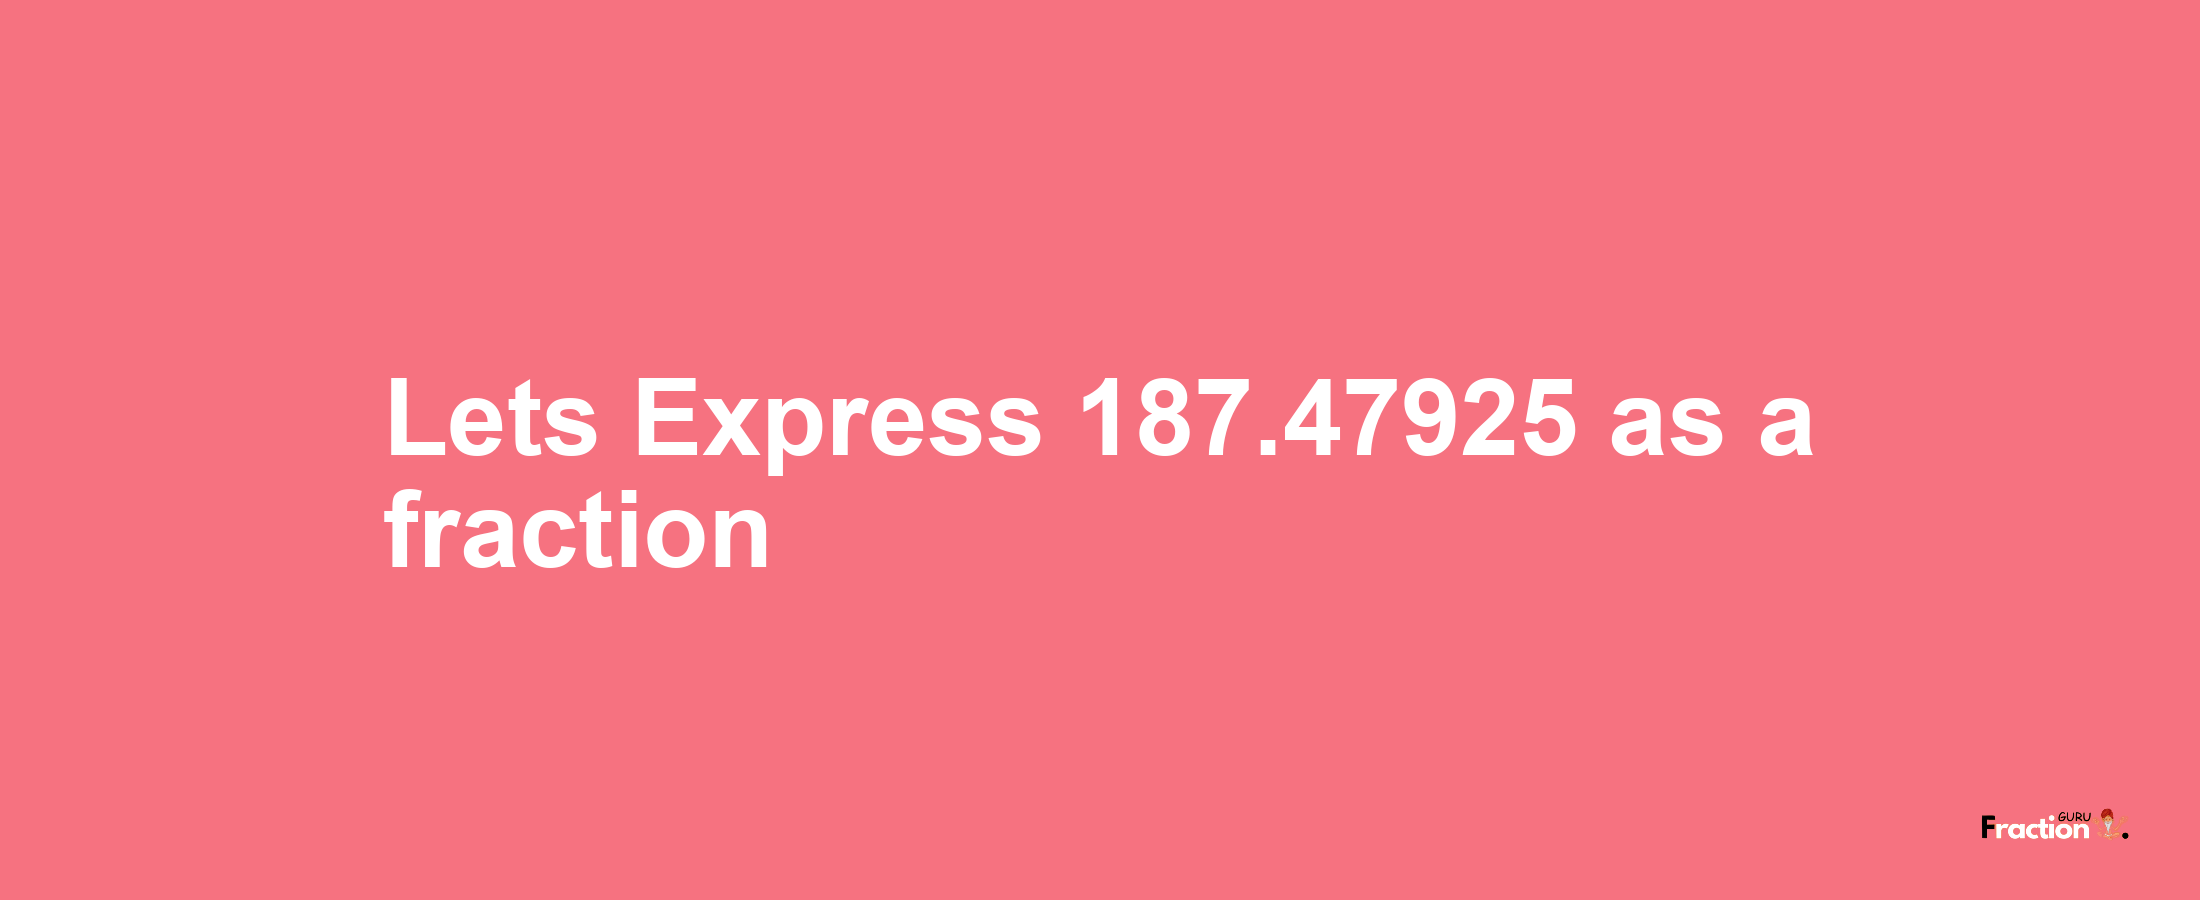 Lets Express 187.47925 as afraction